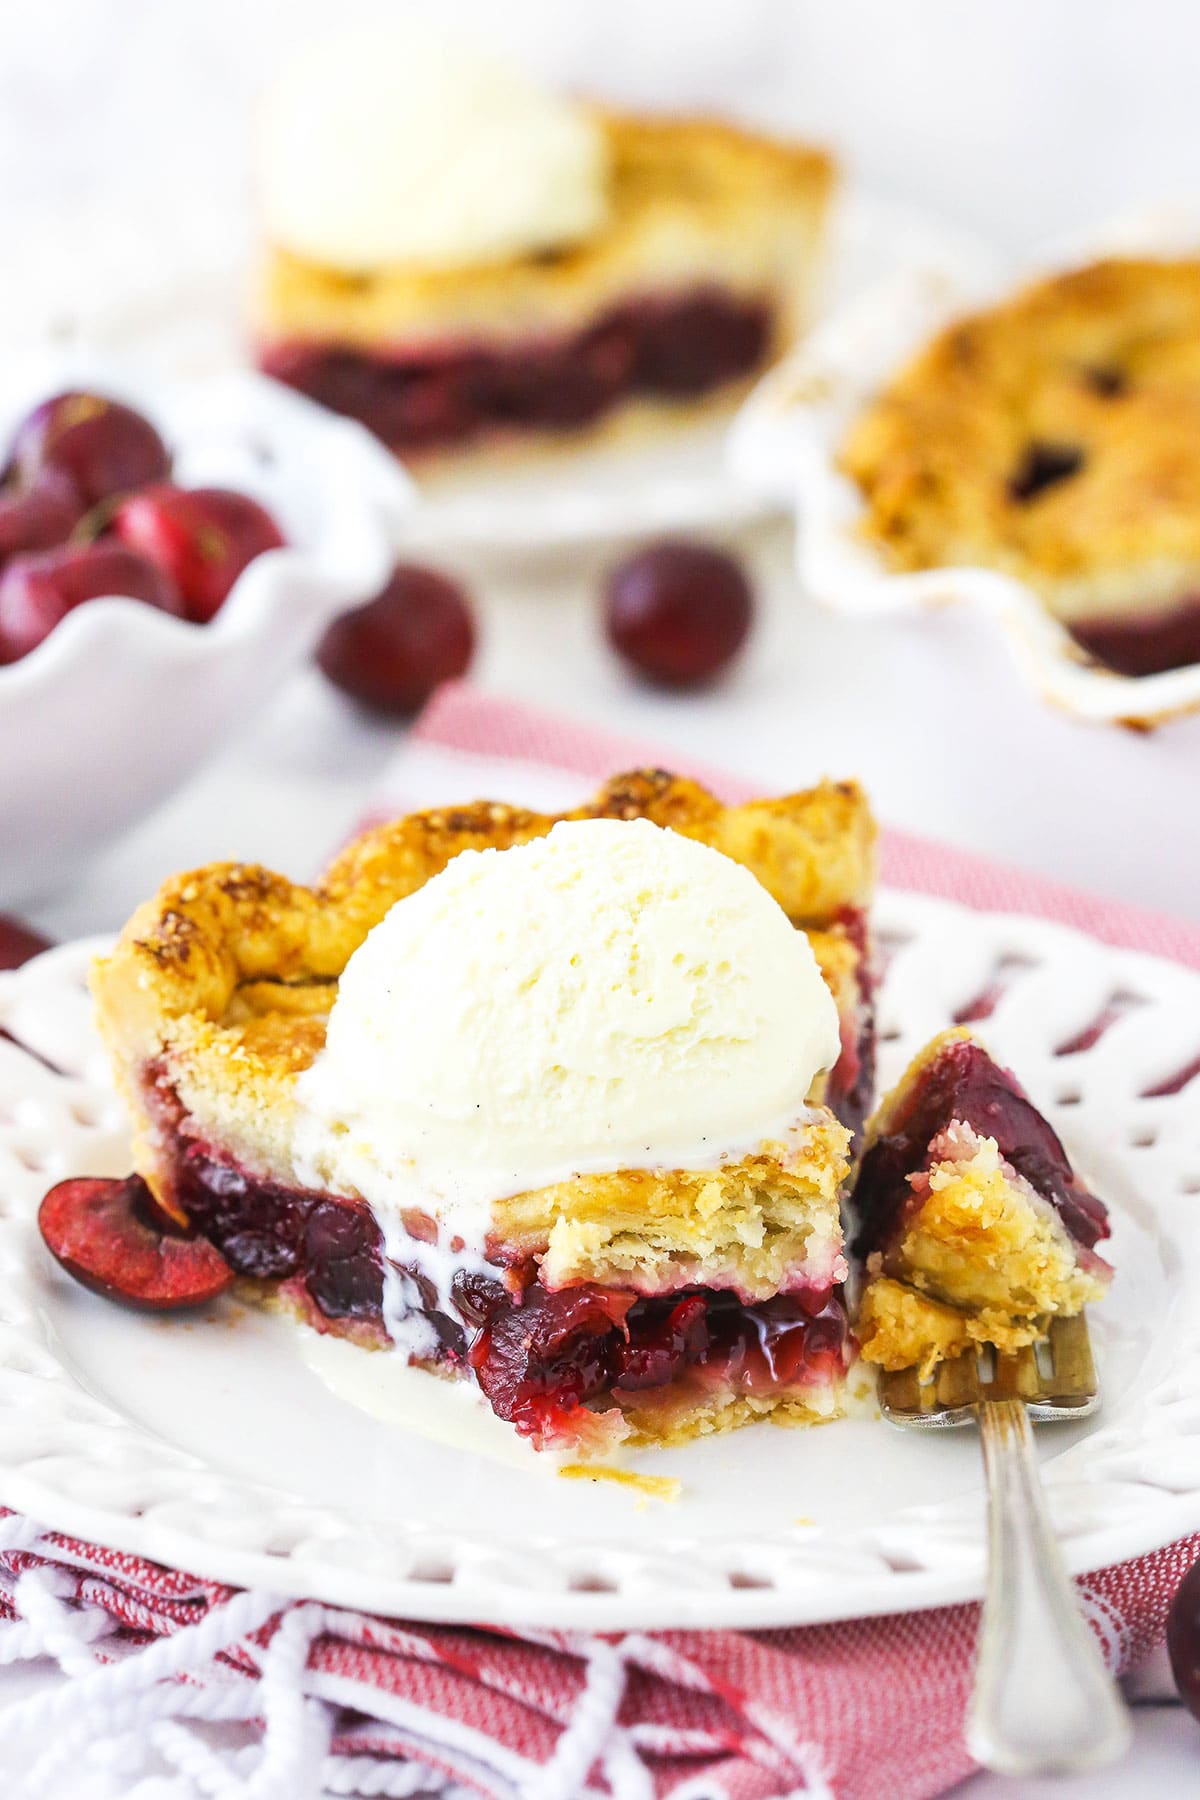 A slice of cherry pie on a plate with one bite on a fork